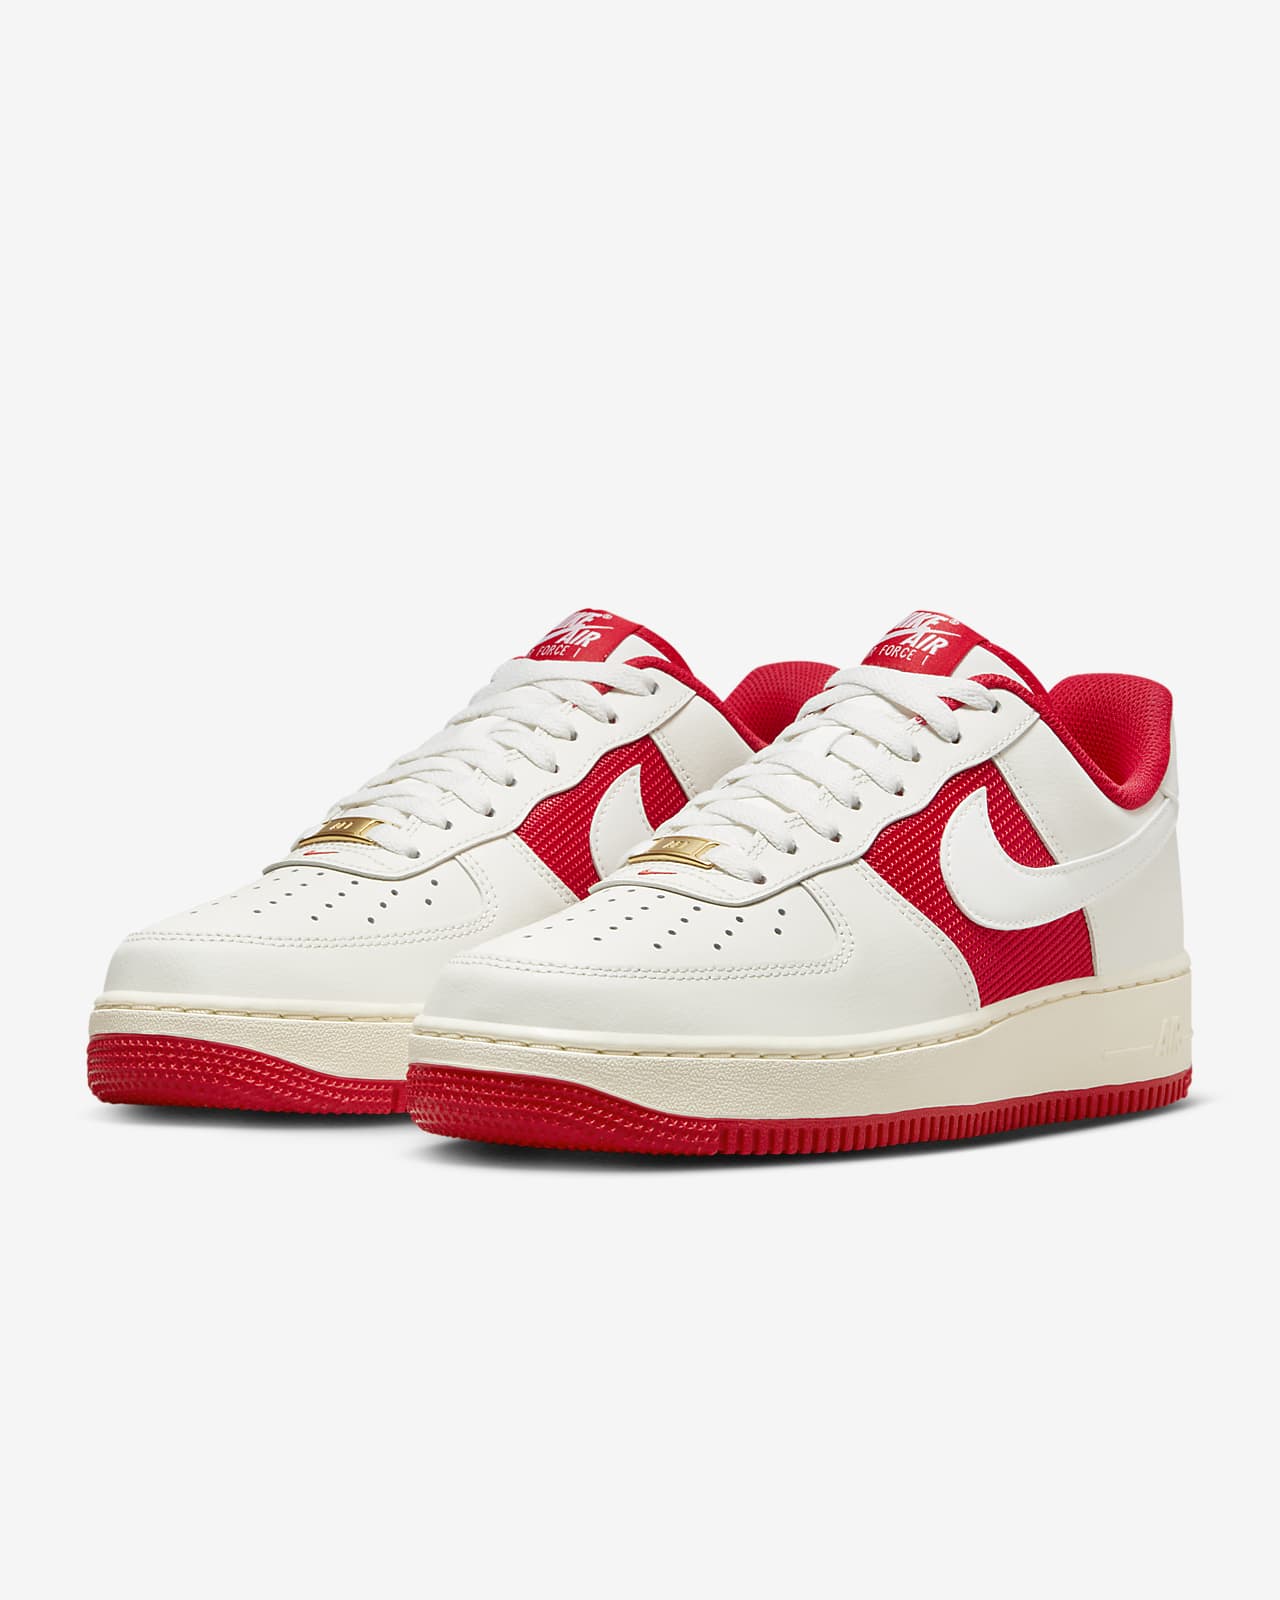 NIKE AIR FORCE1 '07 SUEDE  ナイキエアフォース1